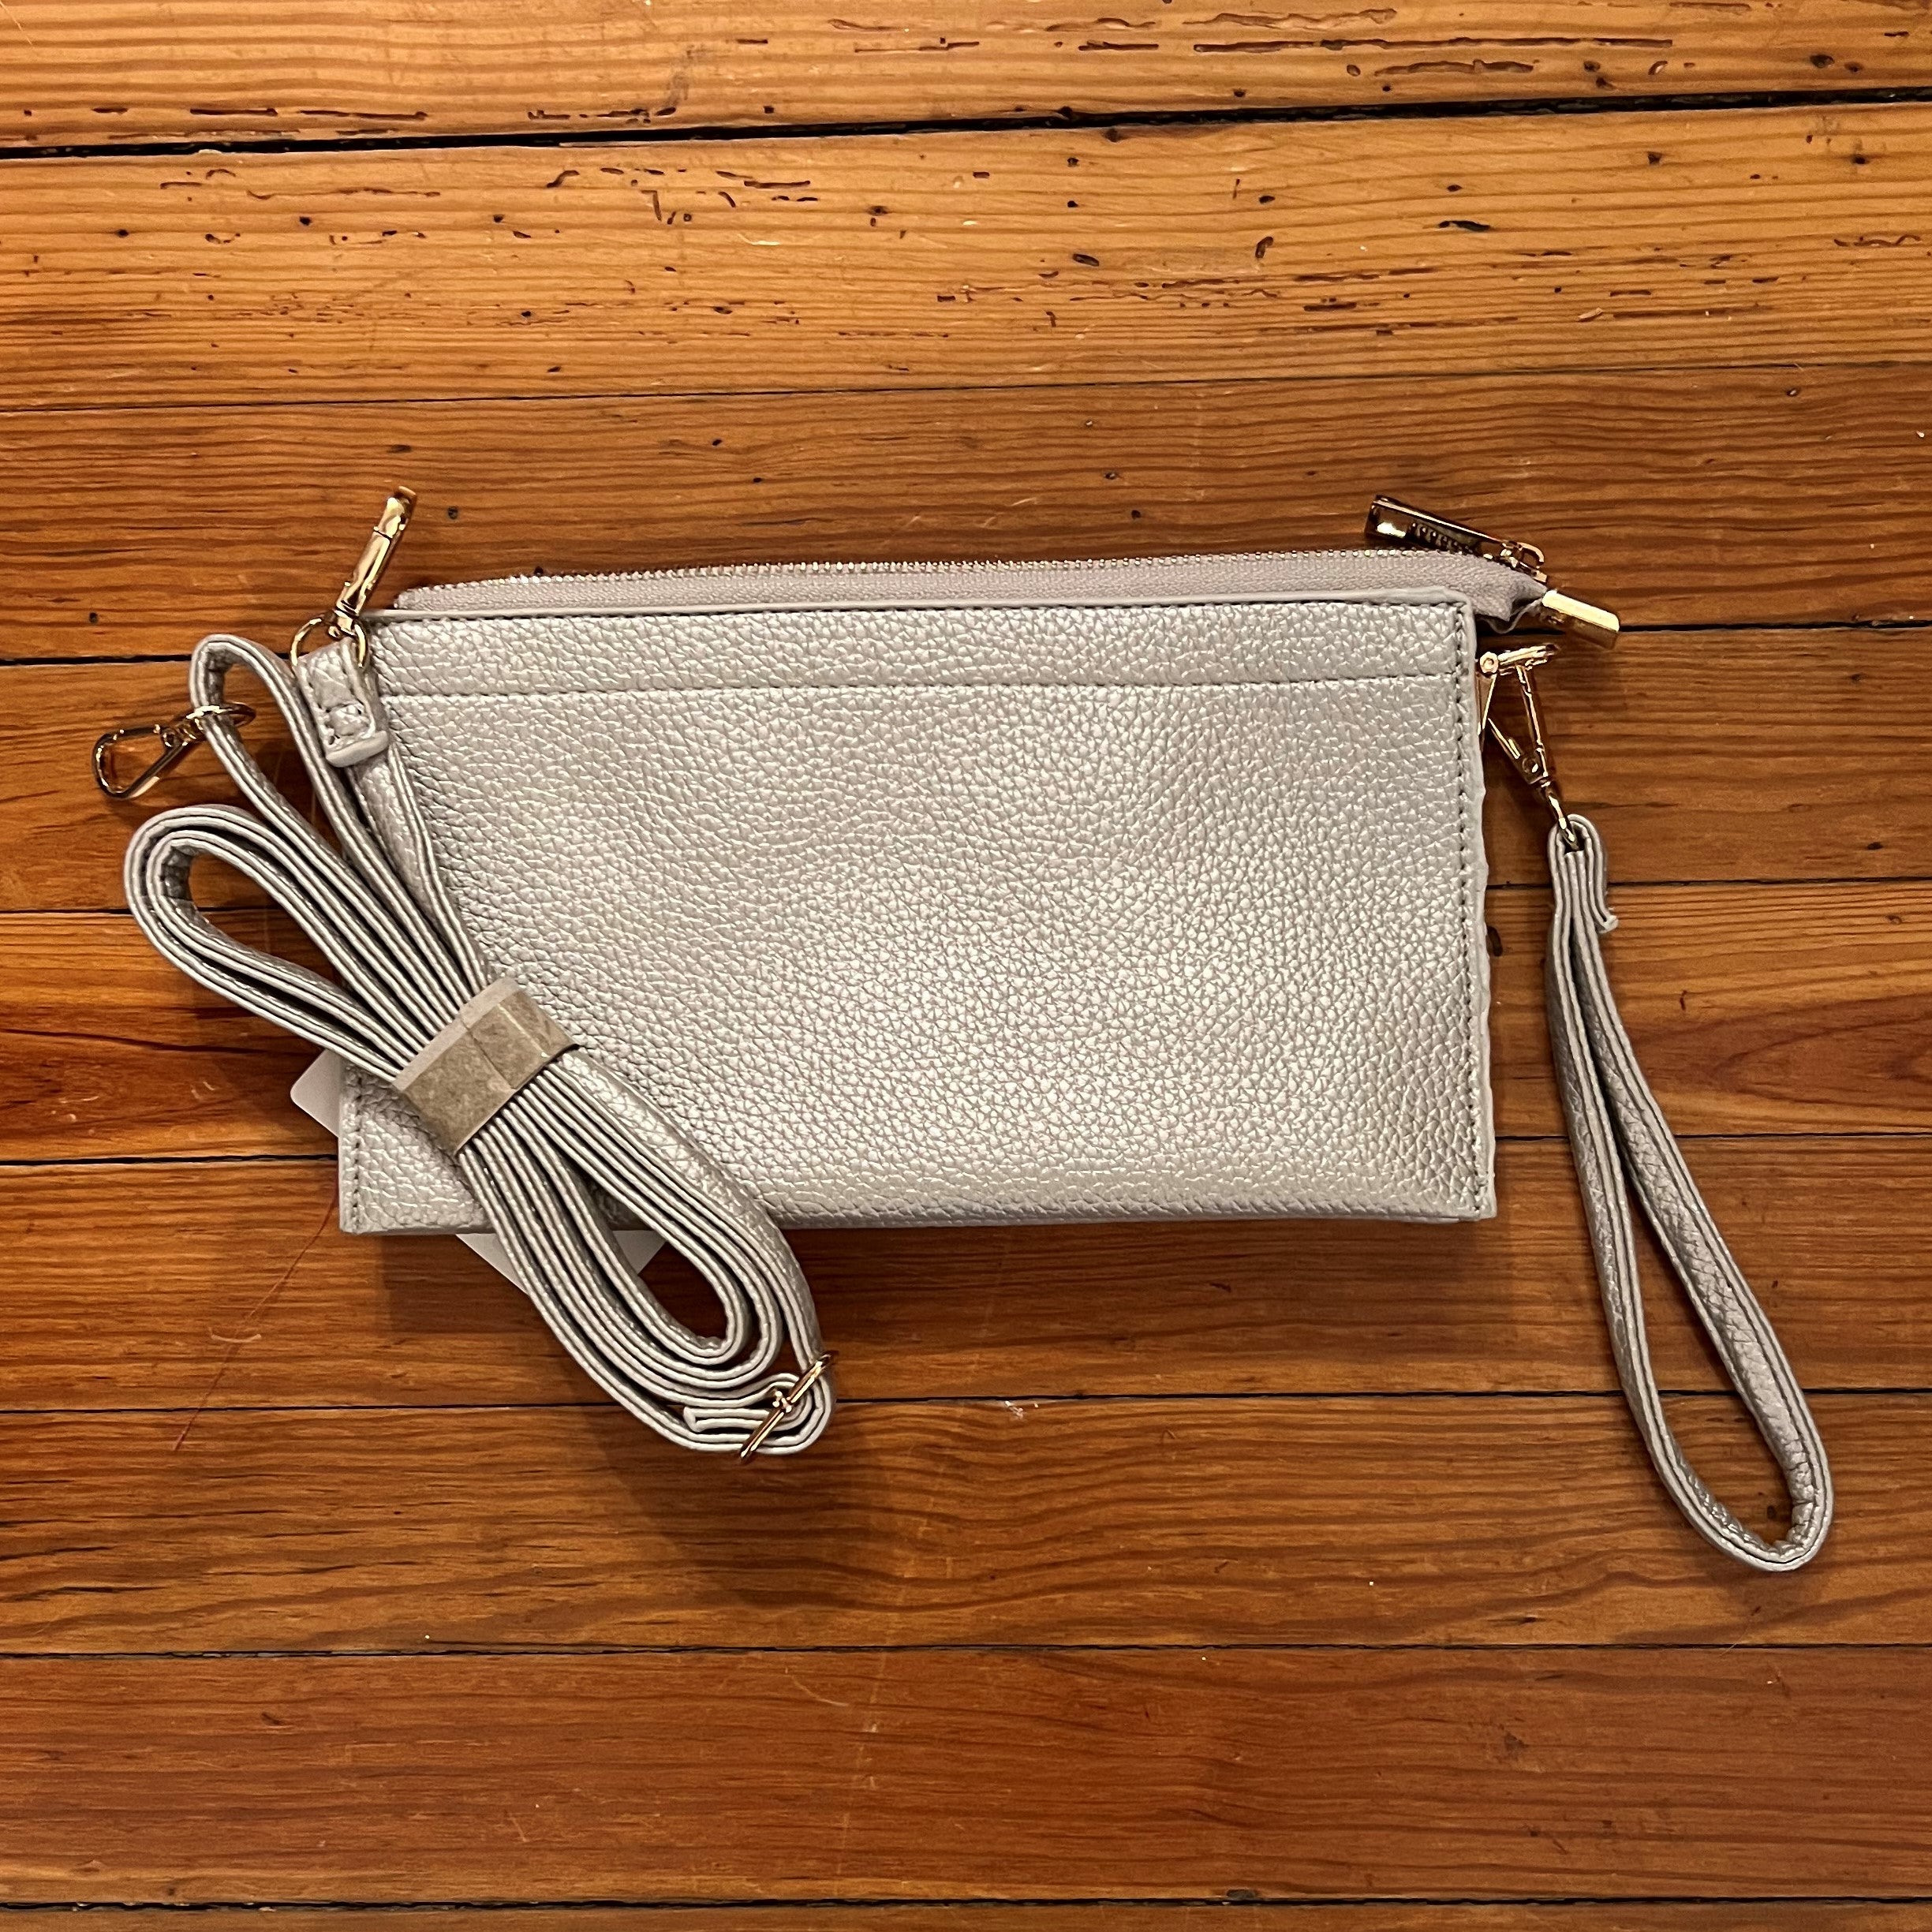 You will love this stylish silver bag! It can be used as a clutch, crossbody or wristlet - it's so versatile! It's such a nice neutral color that it can be dressy or casual. Such a nice piece!